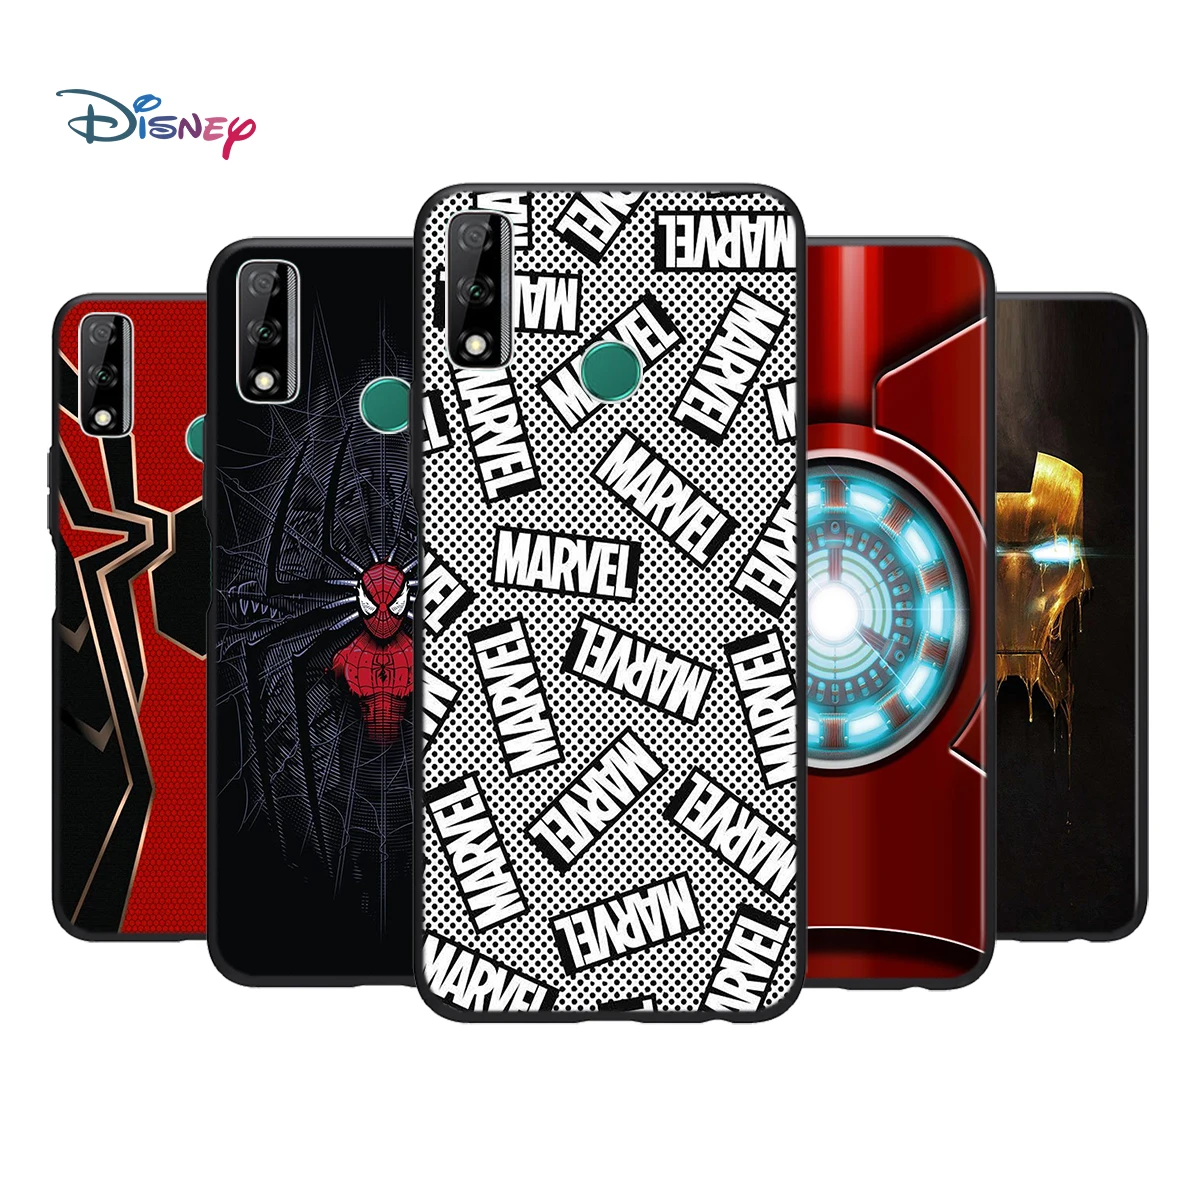 black-soft-marvel-iron-spider-man-for-huawei-y9s-y6s-y8s-y9a-y7a-y8p-y7p-y5p-y6p-y7-y6-pro-prime-2020-2019-phone-case